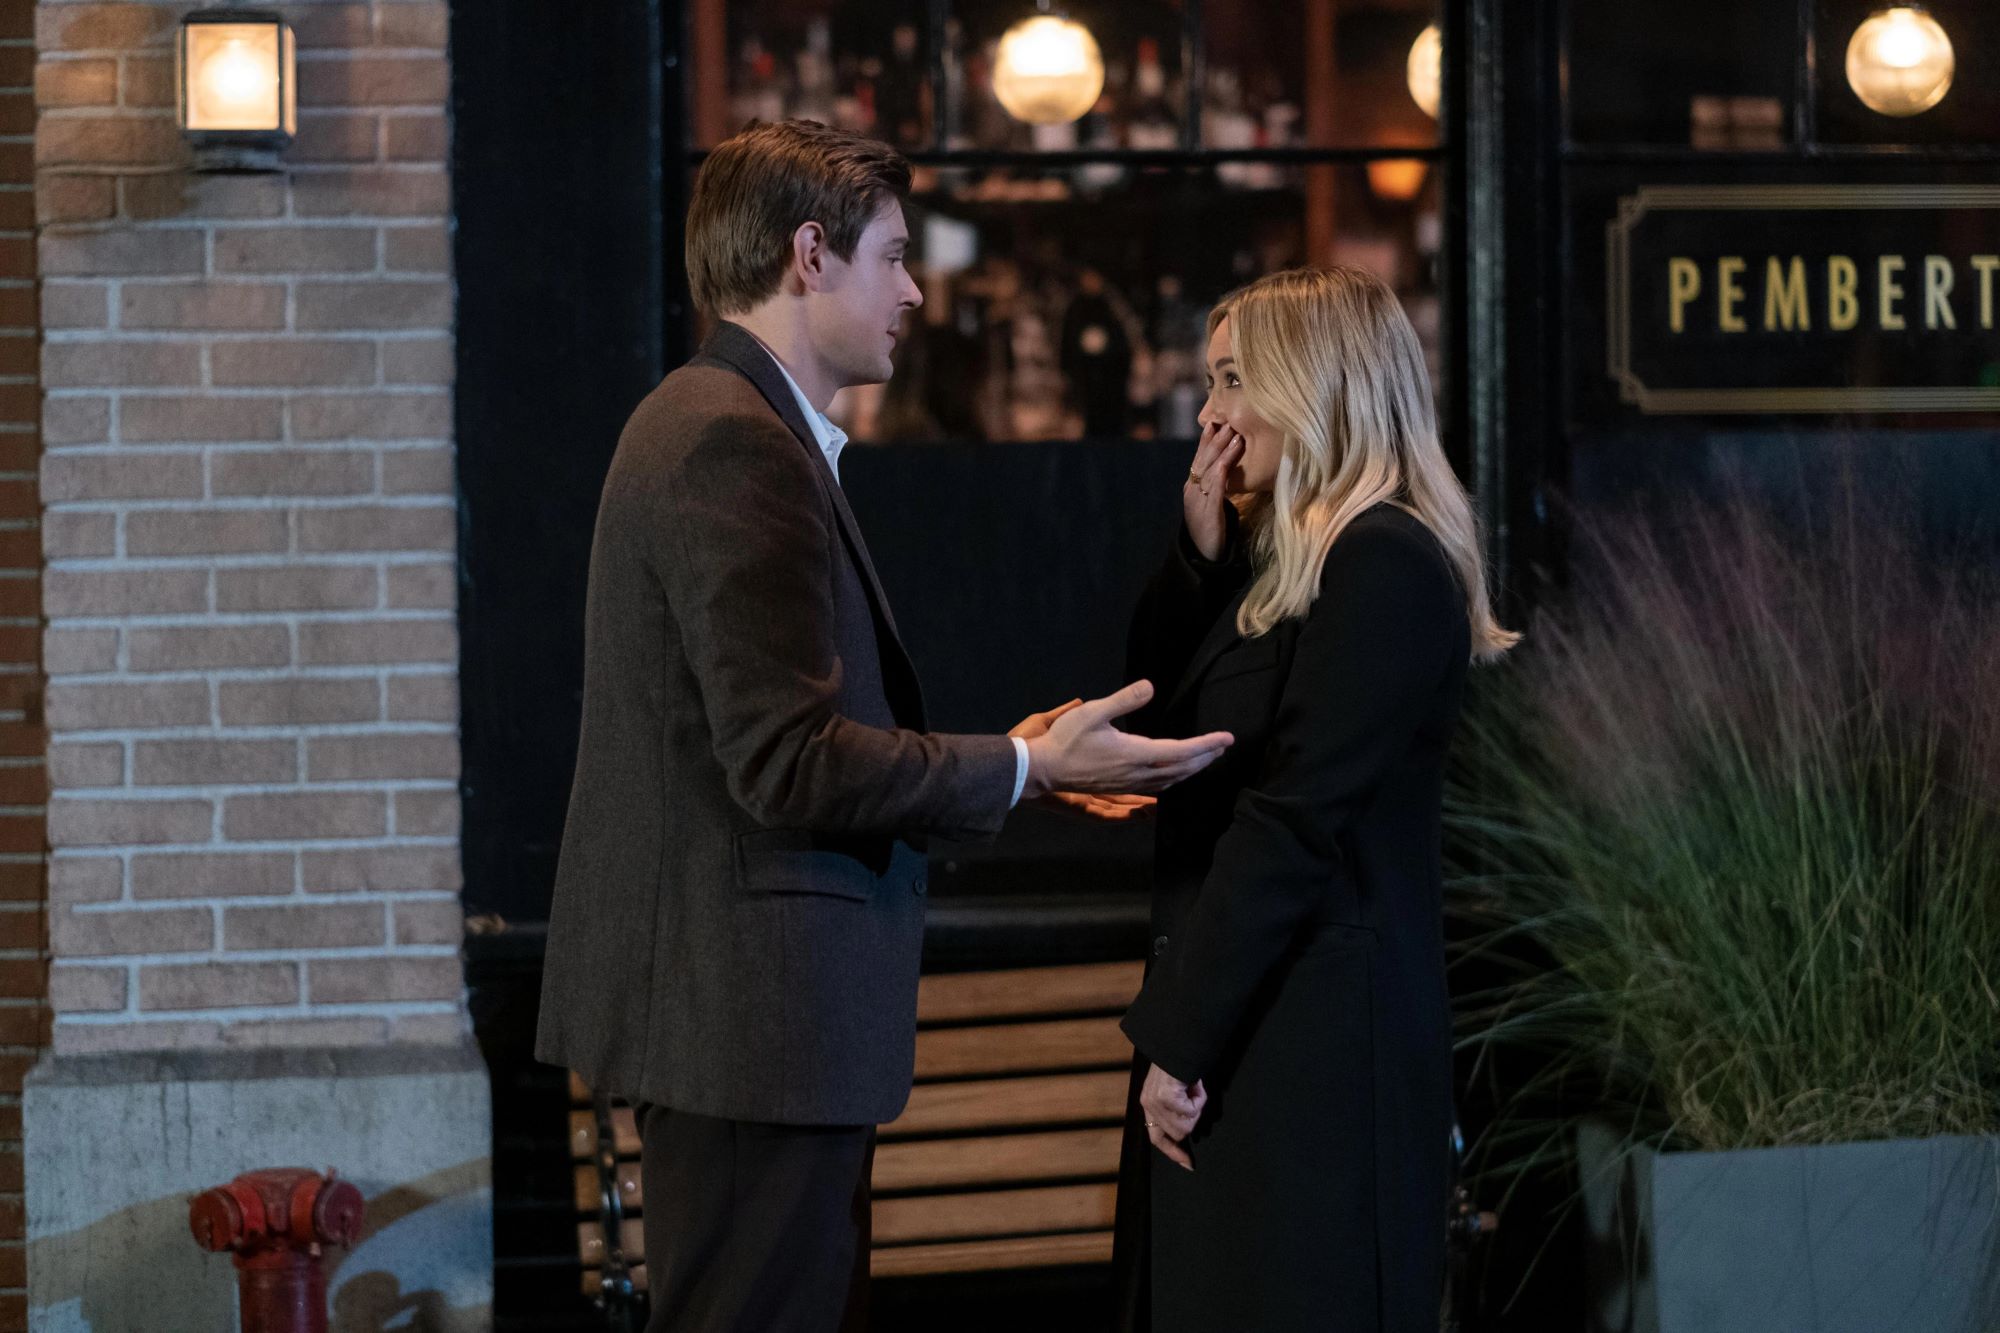 'How I Met Your Father' Season 1 Episode 9 stars Chris Lowell and Hilary Duff, in character as Jesse and Sophie, share a scene. Jesse wears a dark brown suit. Sophie wears a black coat.